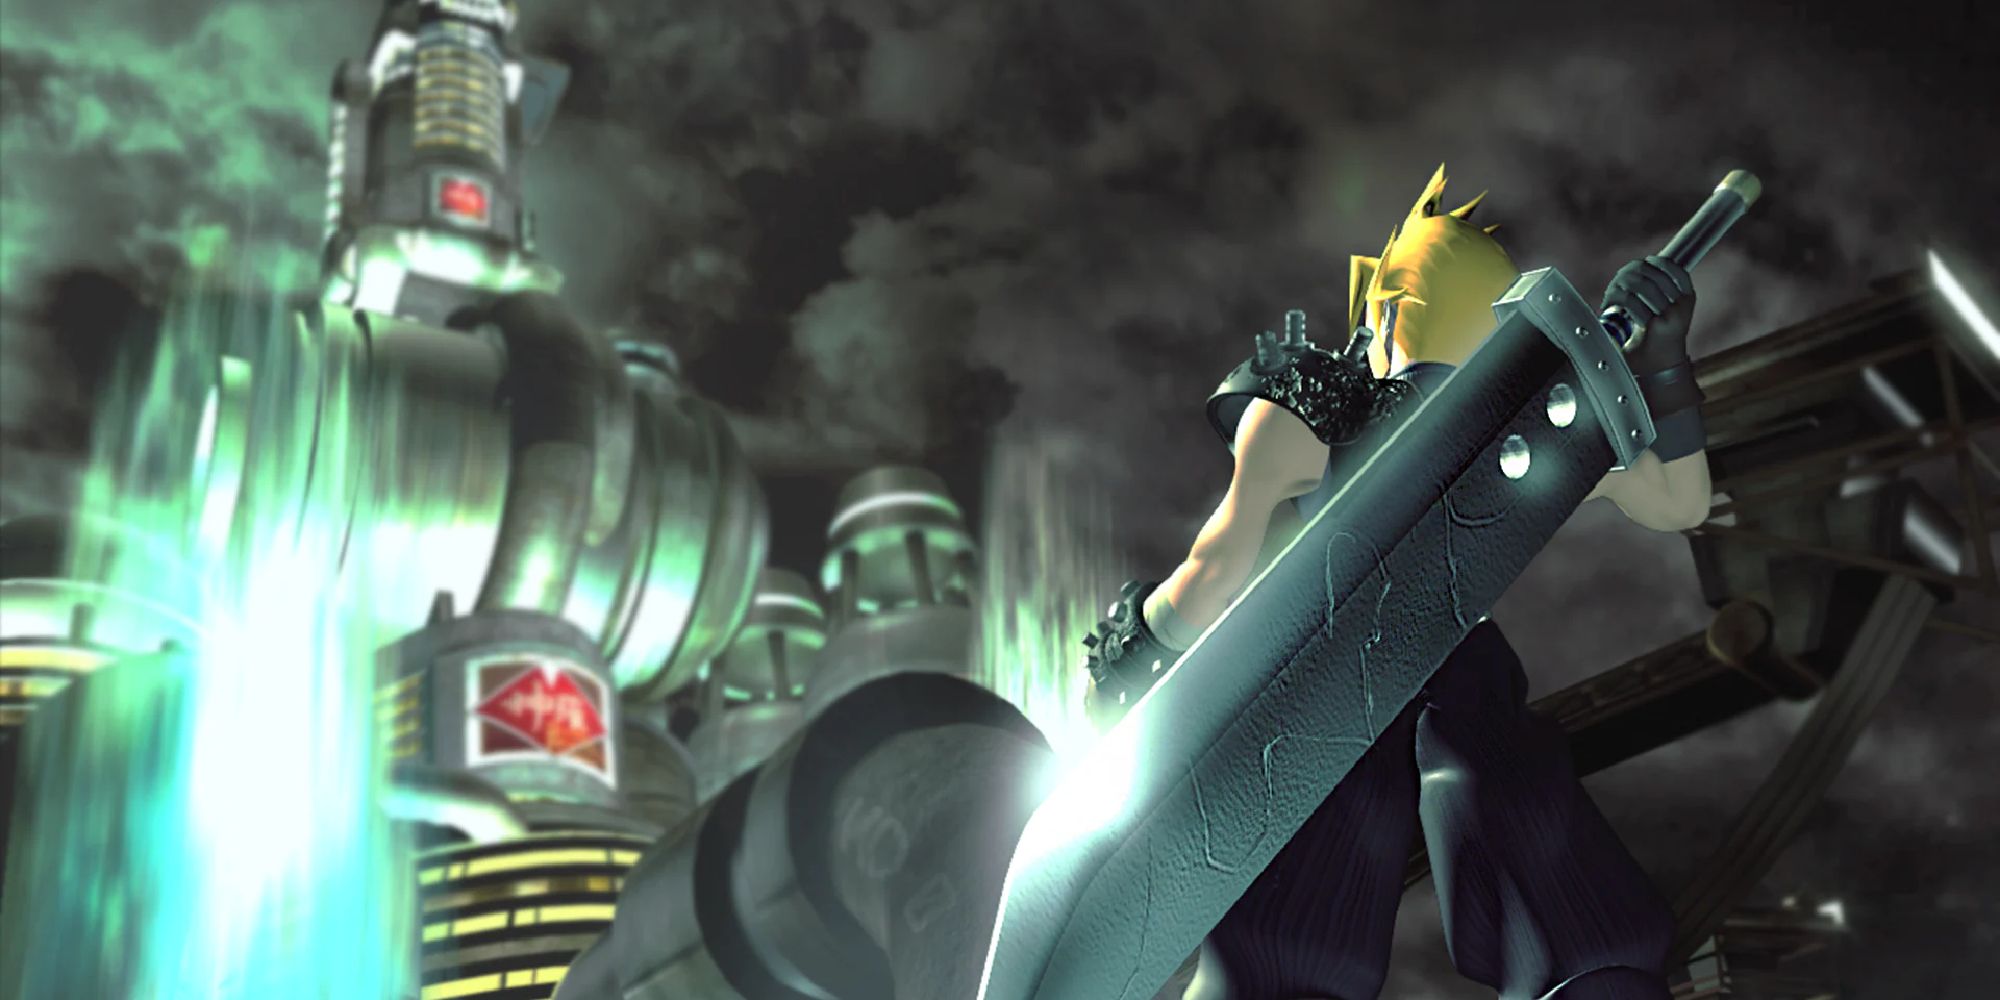 Cloud Strife looking at a large machine in the original version of FF7.